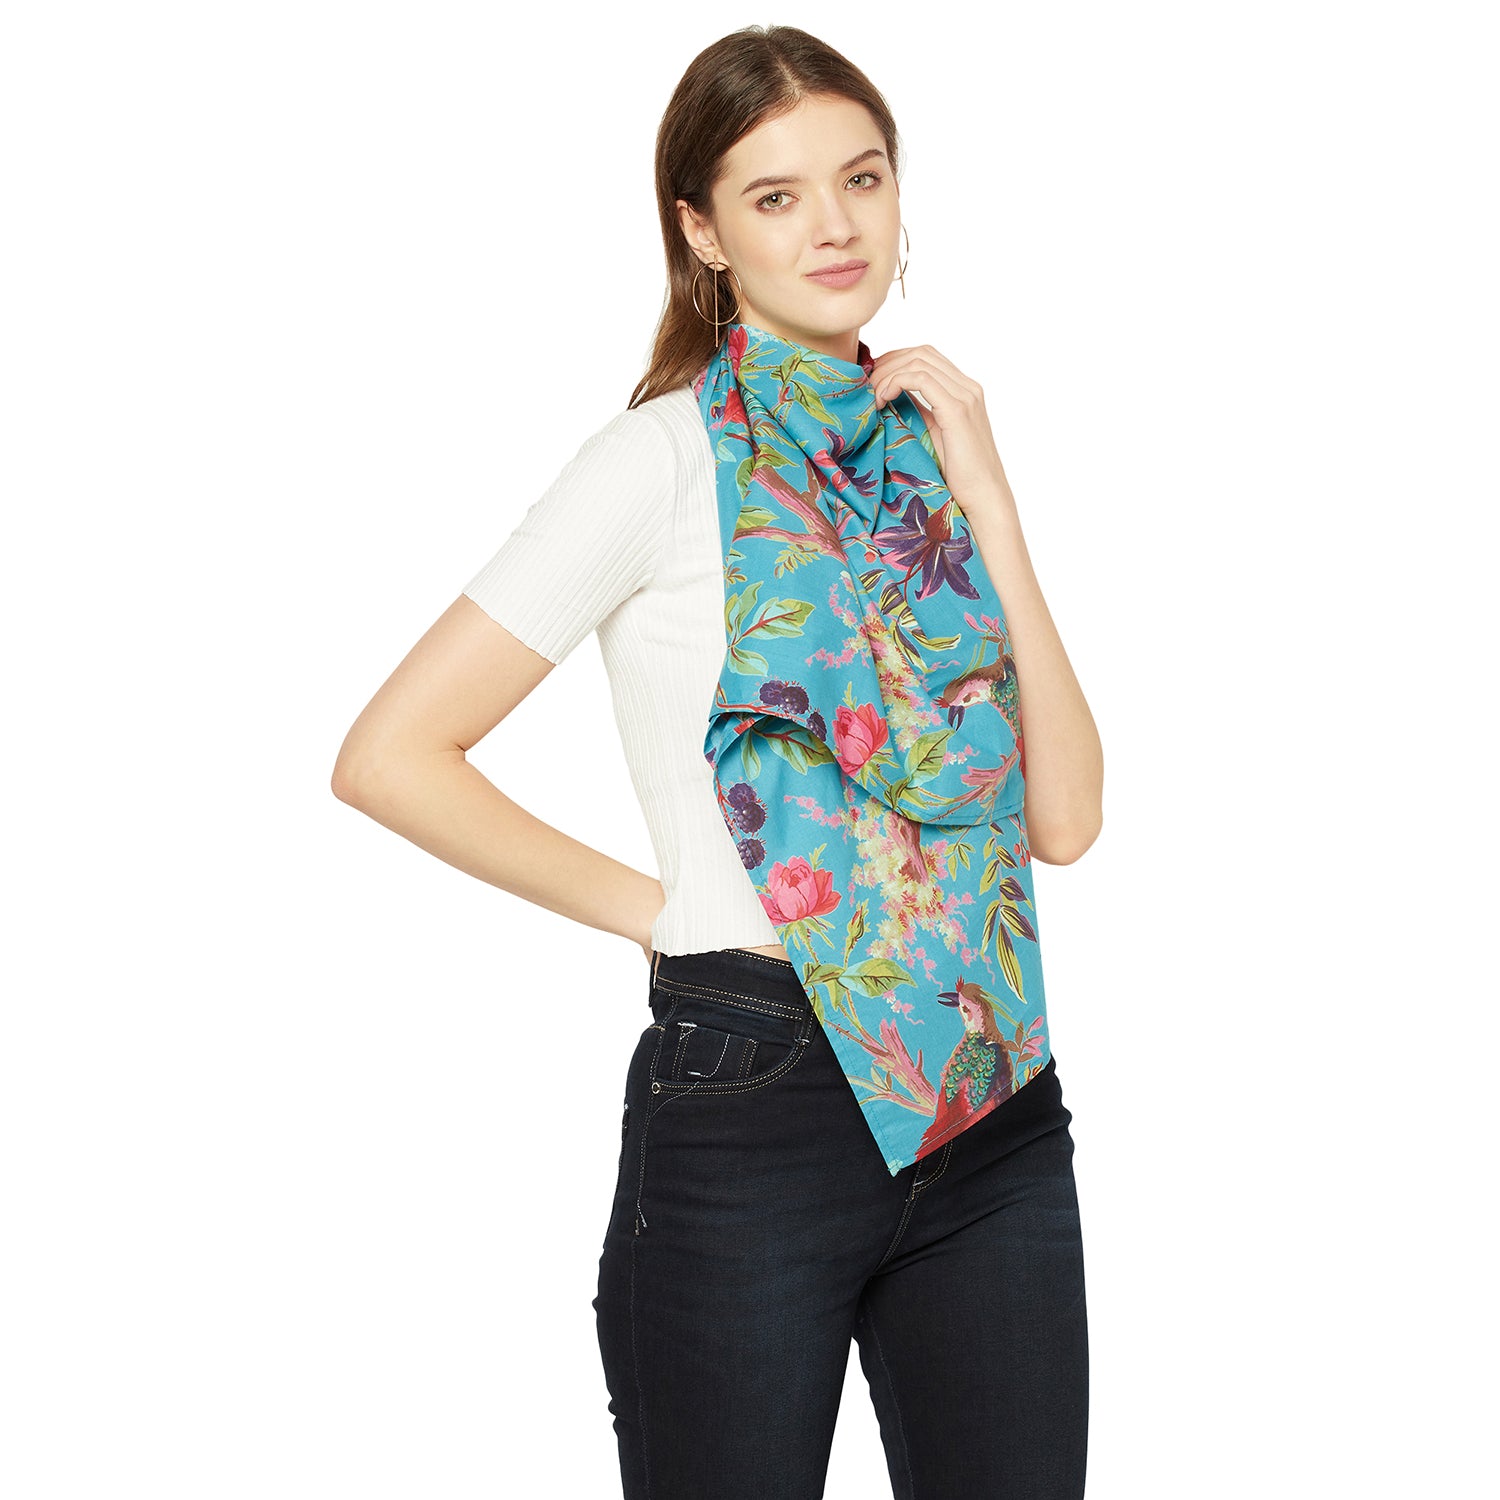 'Blooming Beauty' 100% Cotton Scarf